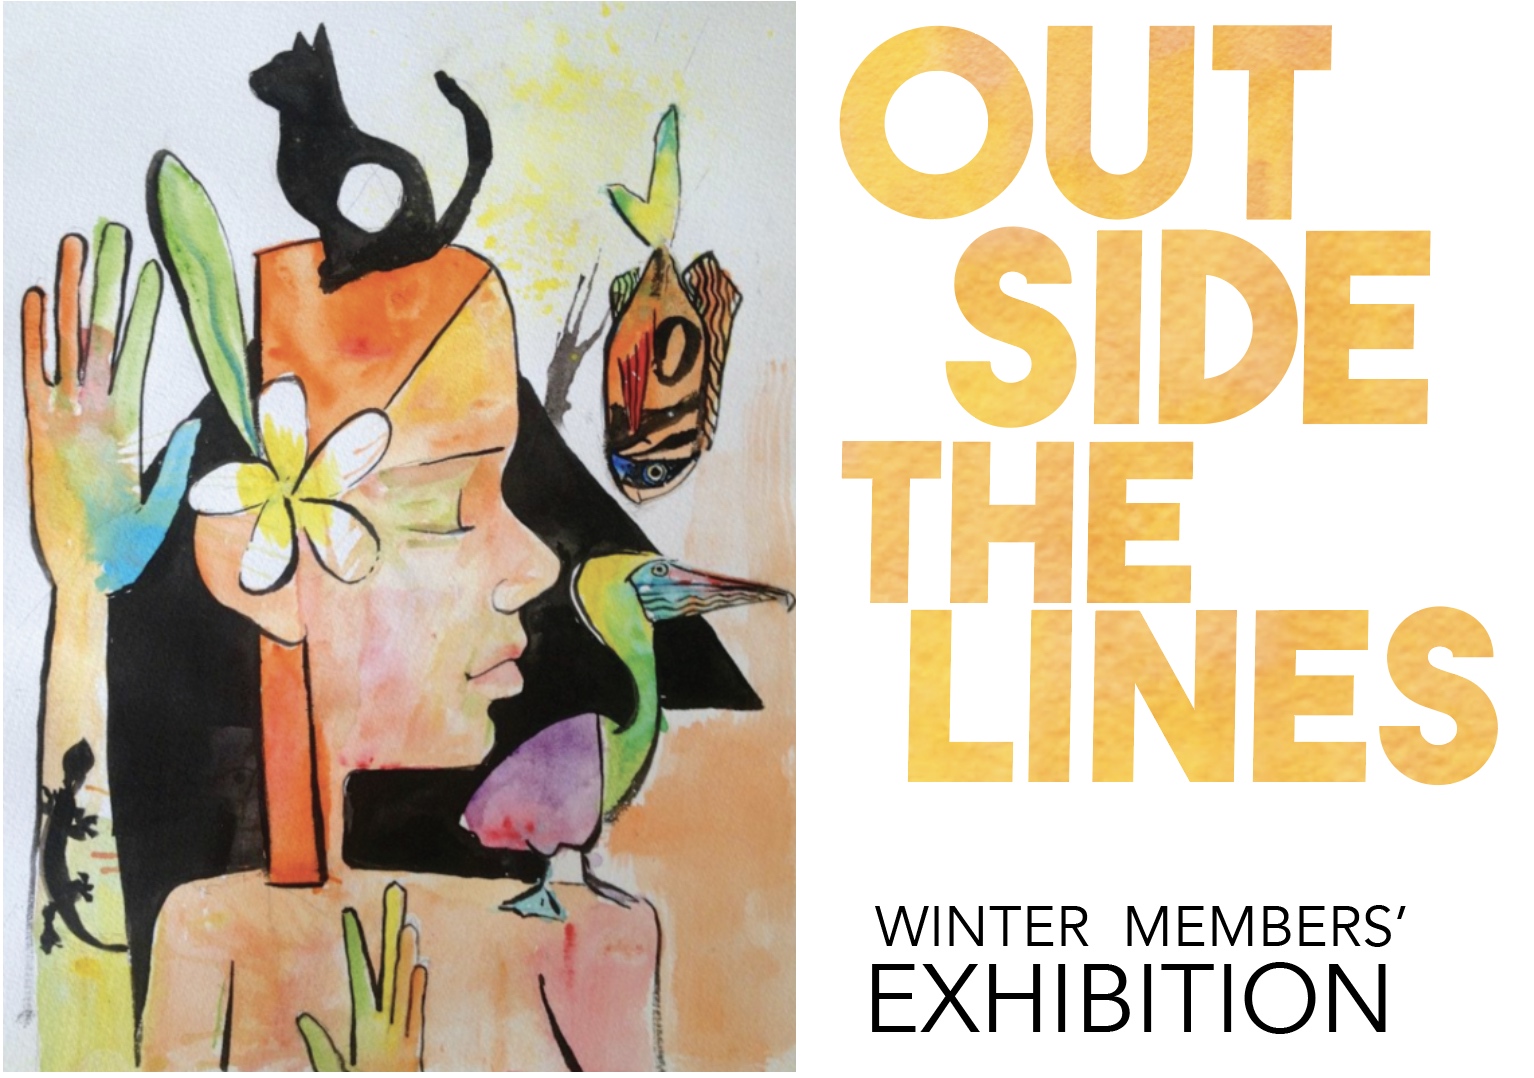 "Outside the Lines" The Studios' Winter Members' Exhibition